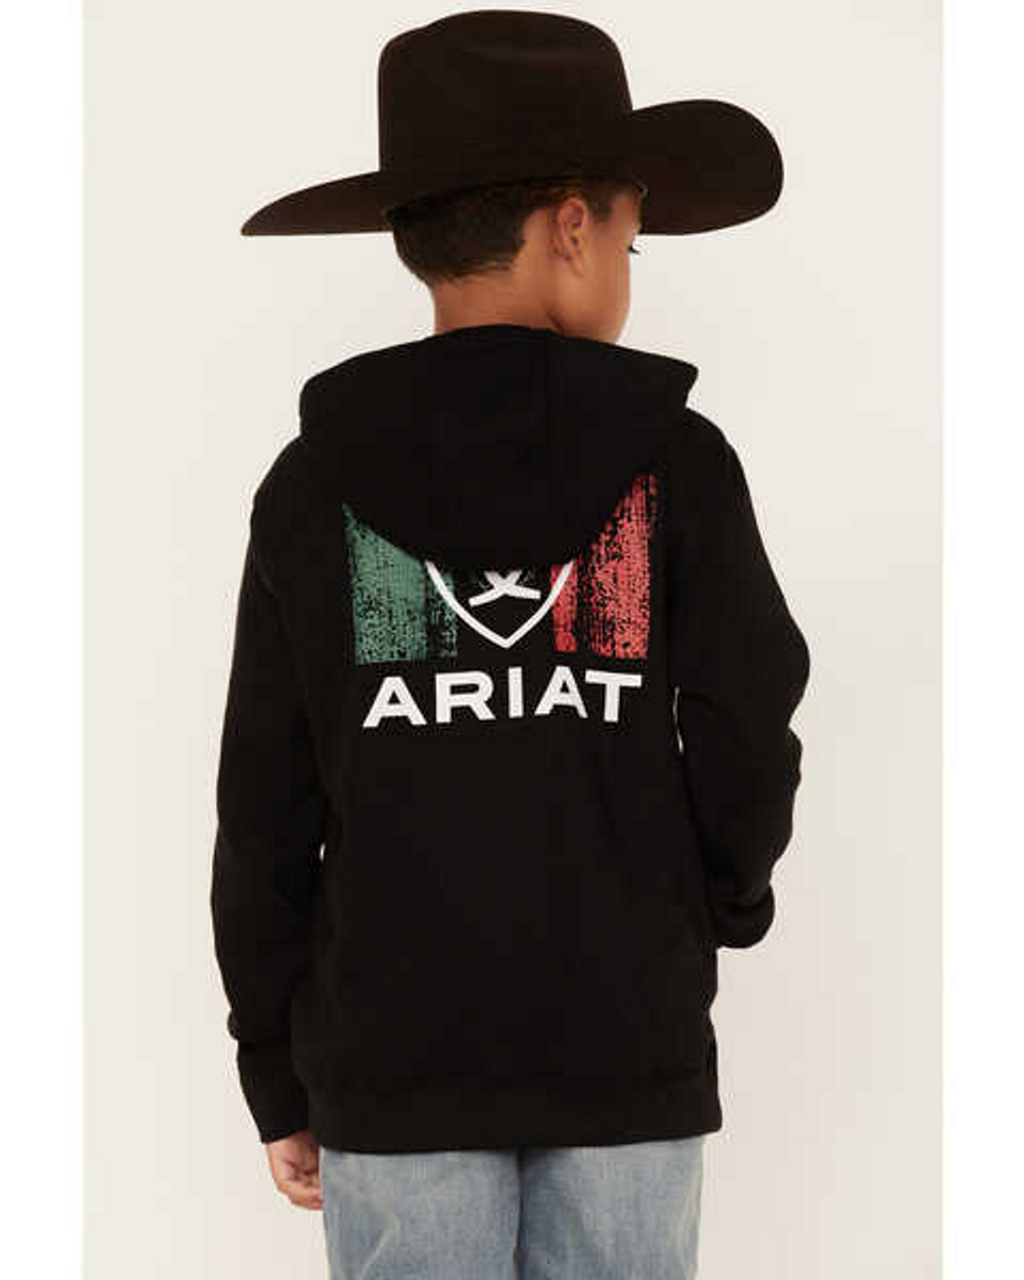 https://cdn11.bigcommerce.com/s-t1n43taf3i/images/stencil/1280x1280/products/42591/149012/Ariat-Youth-Shield-Mexico-Hoodie-Black-__S_1__32835.1673199352.png?c=2